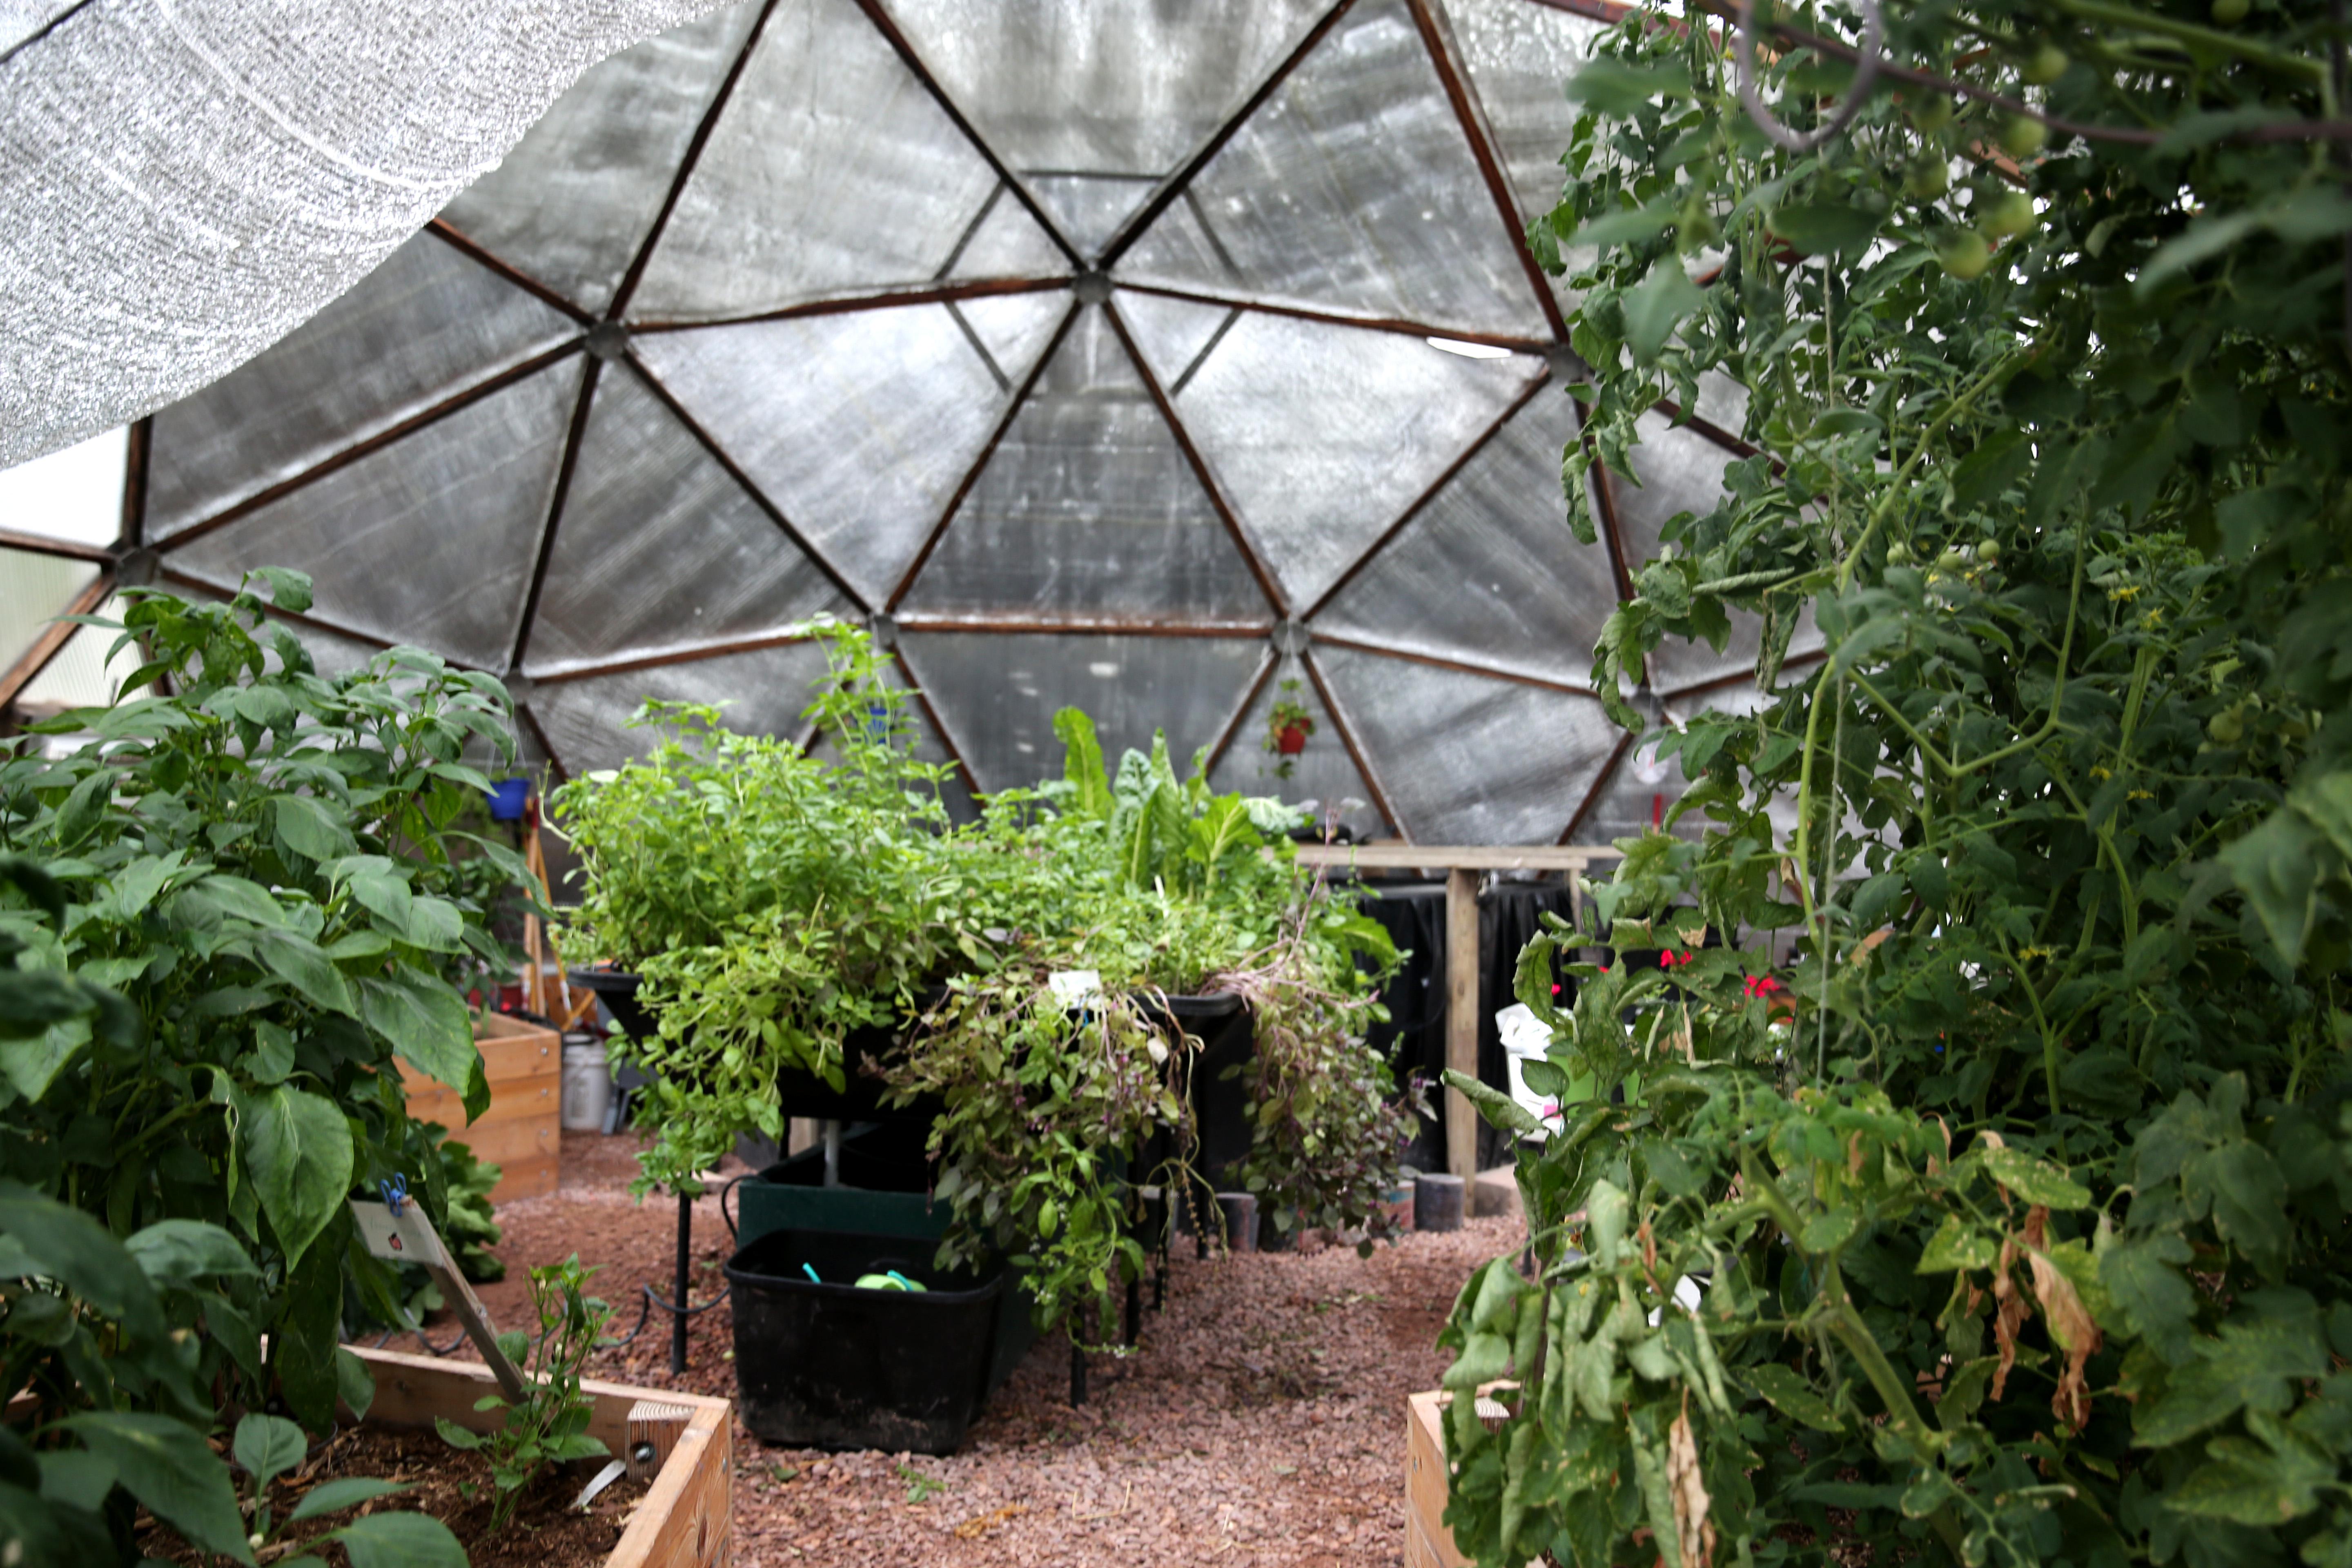 inside view of greenhouse